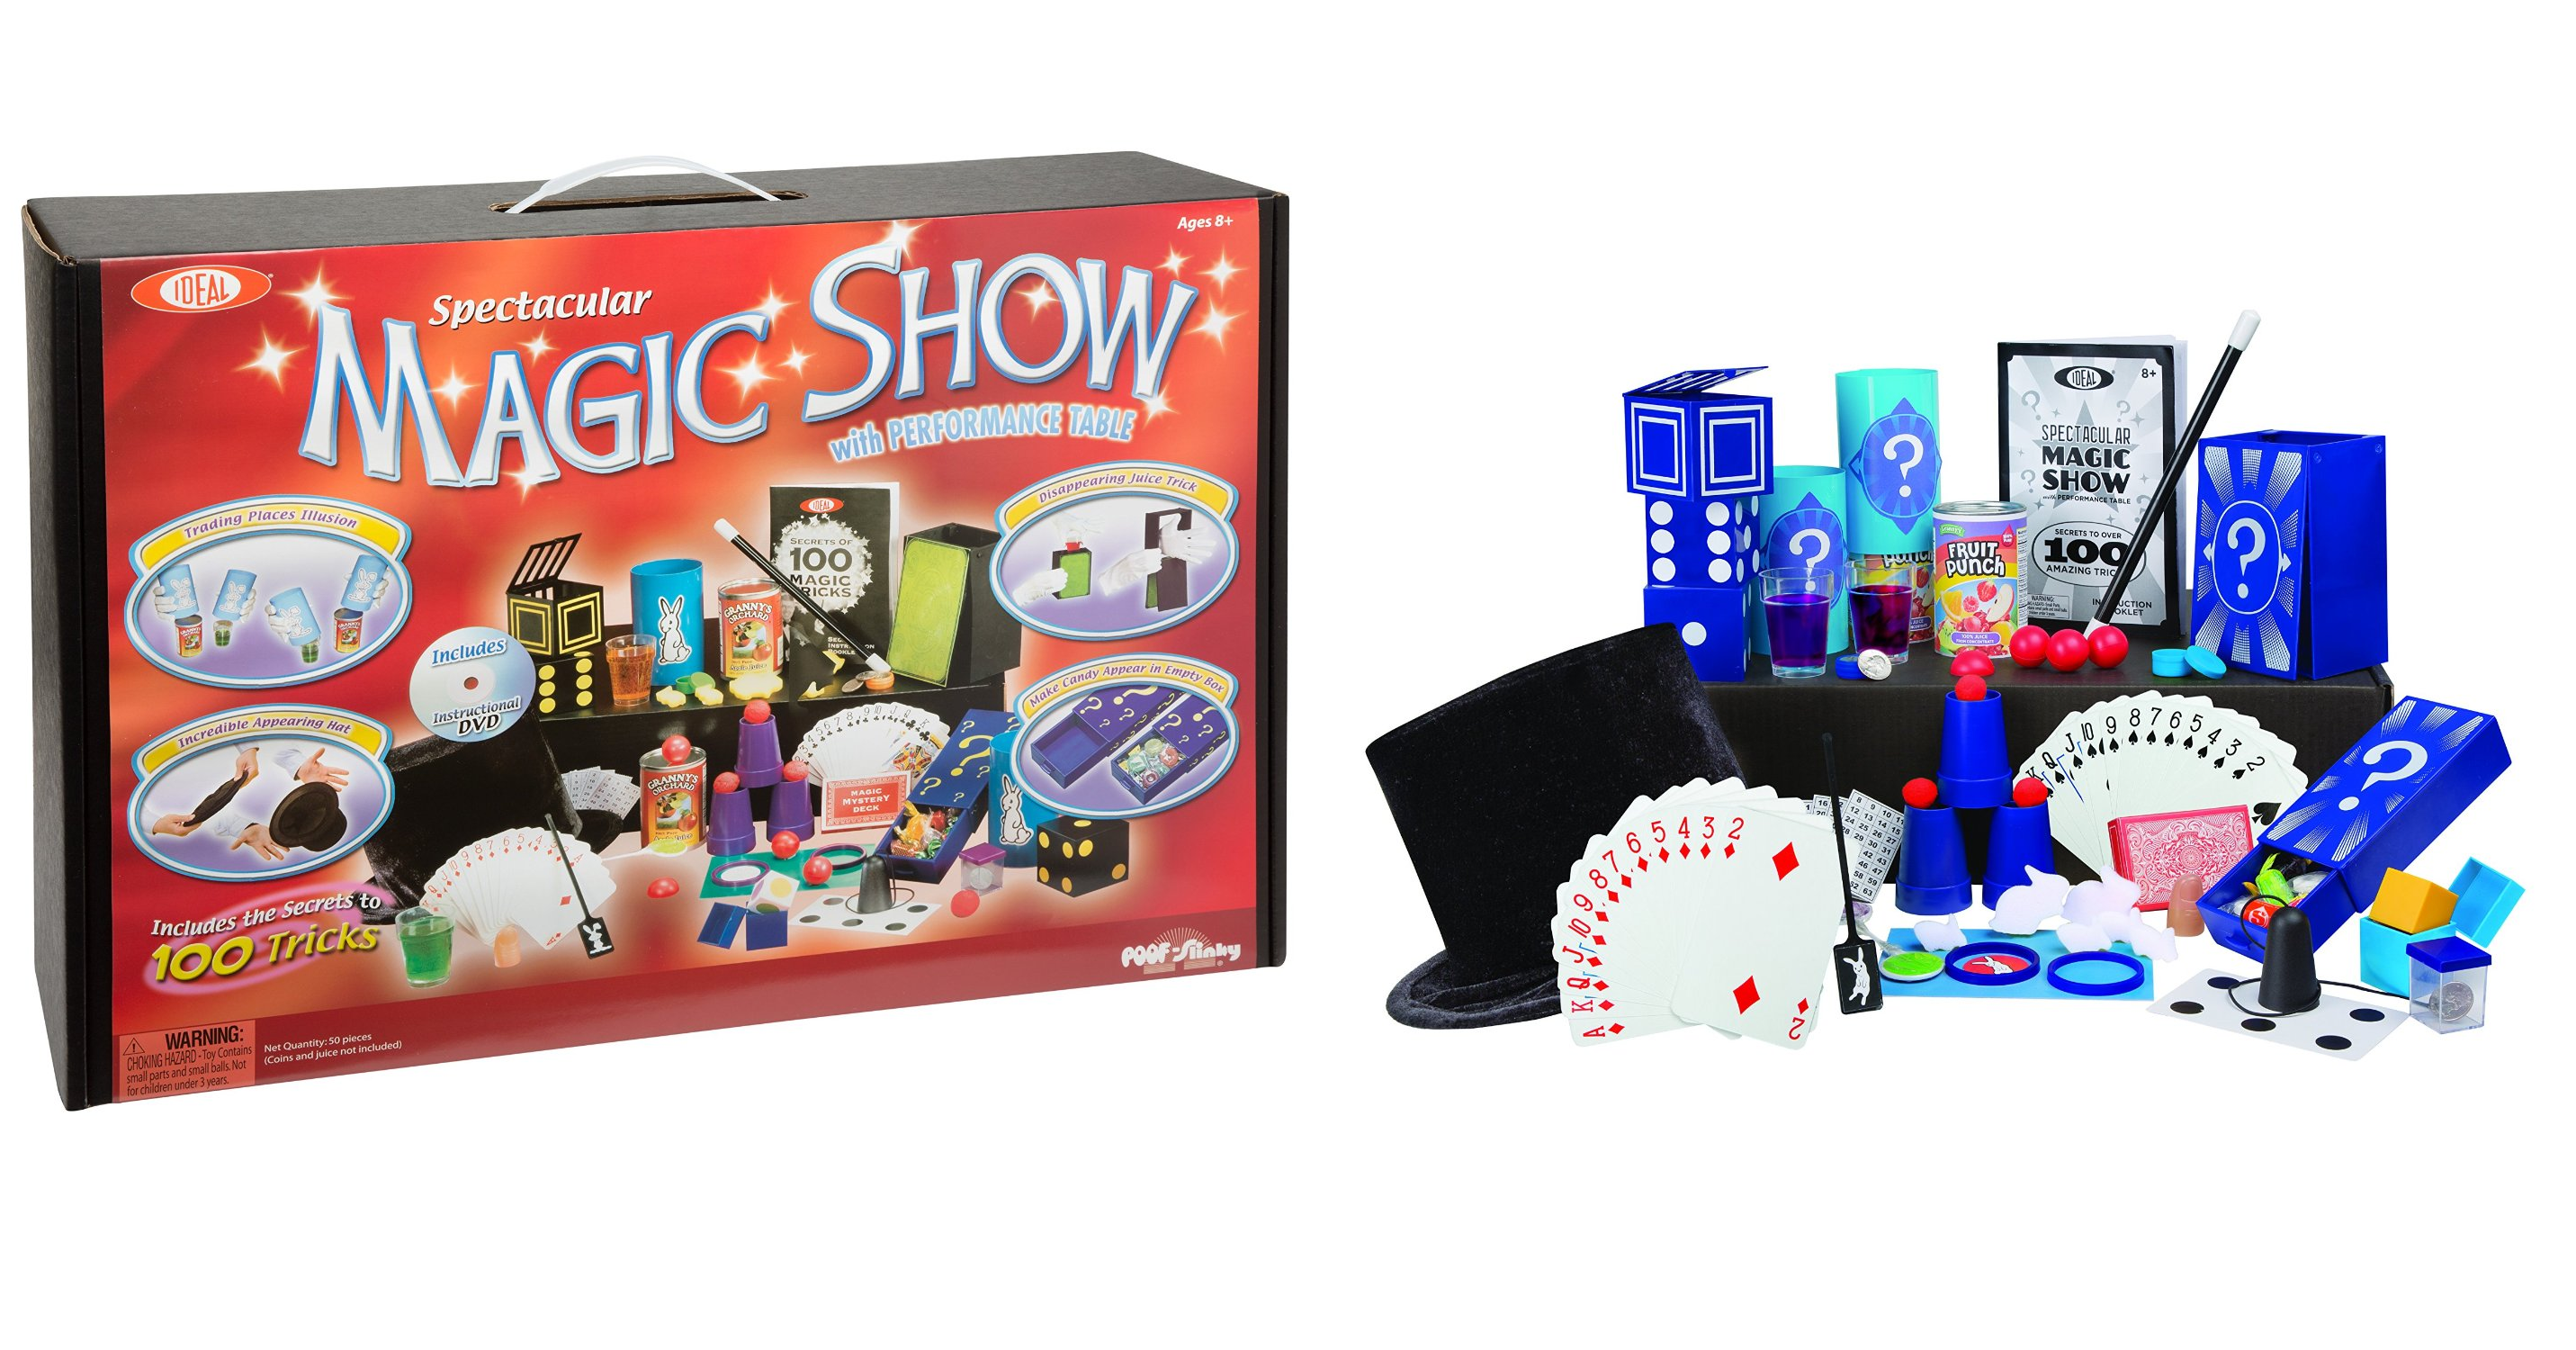 Ideal 100-Trick Spectacular Magic Show Suitcase Just $15.99 on Amazon!